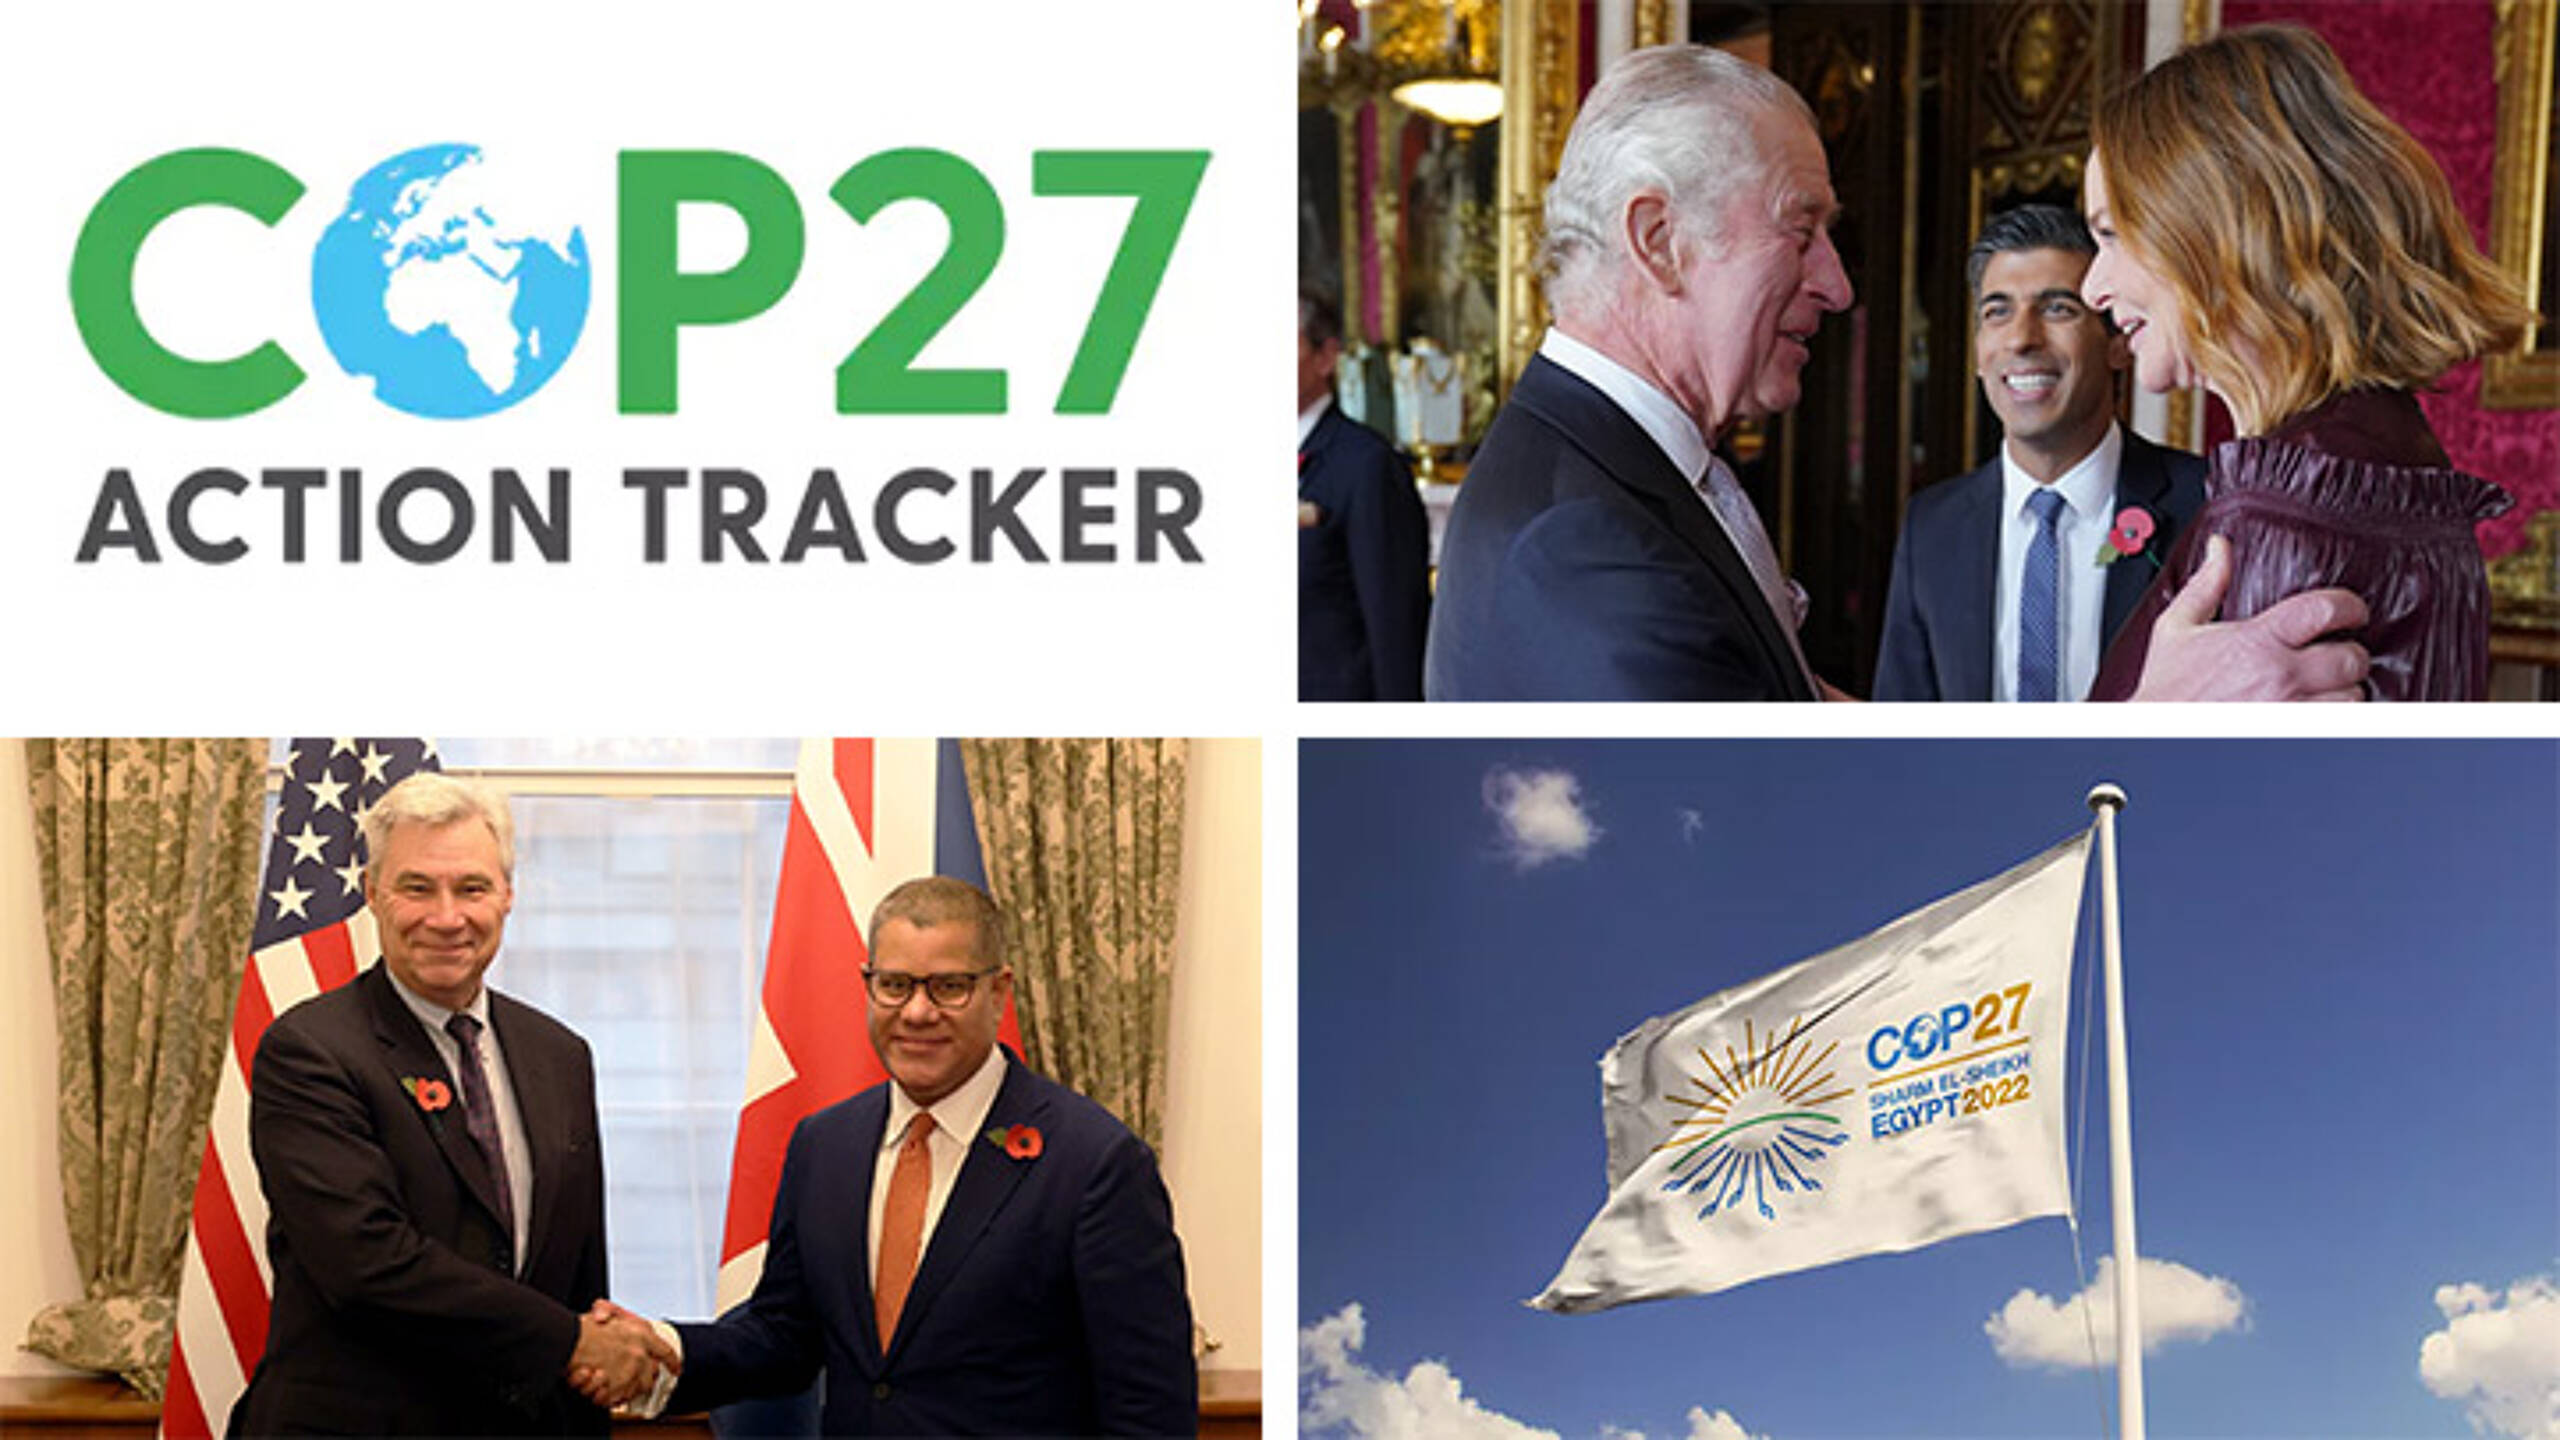 COP27 Action Tracker: Egypt criticised for ‘extortionate’ accommodation costs as Buckingham Palace welcomes policymakers